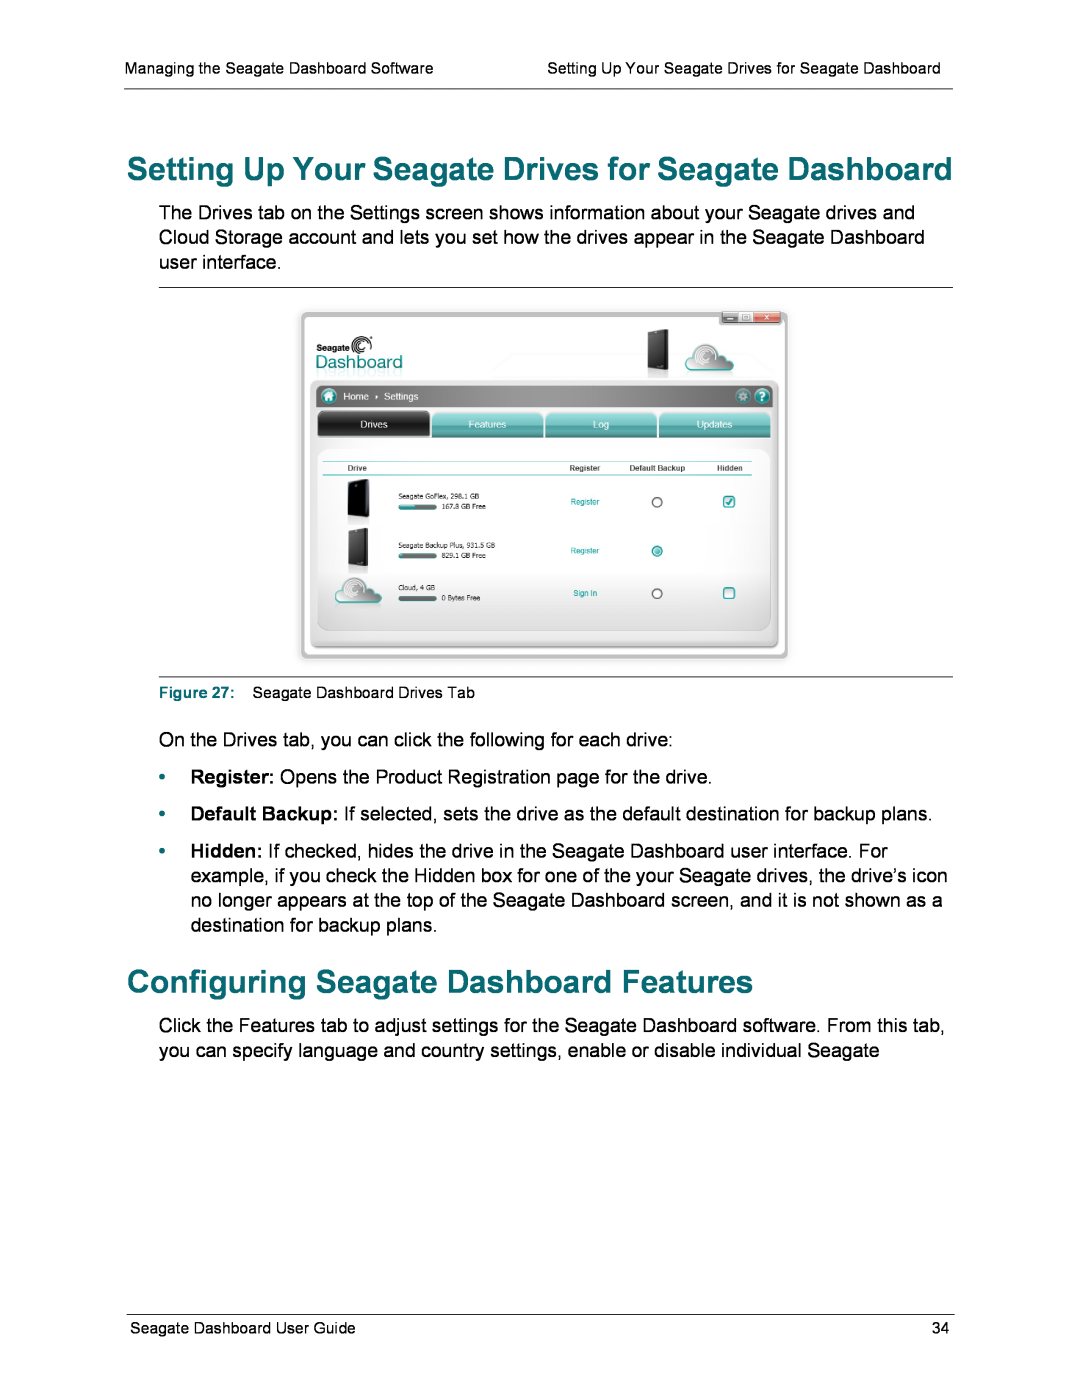 Seagate STBU500101 manual Setting Up Your Seagate Drives for Seagate Dashboard, Configuring Seagate Dashboard Features 